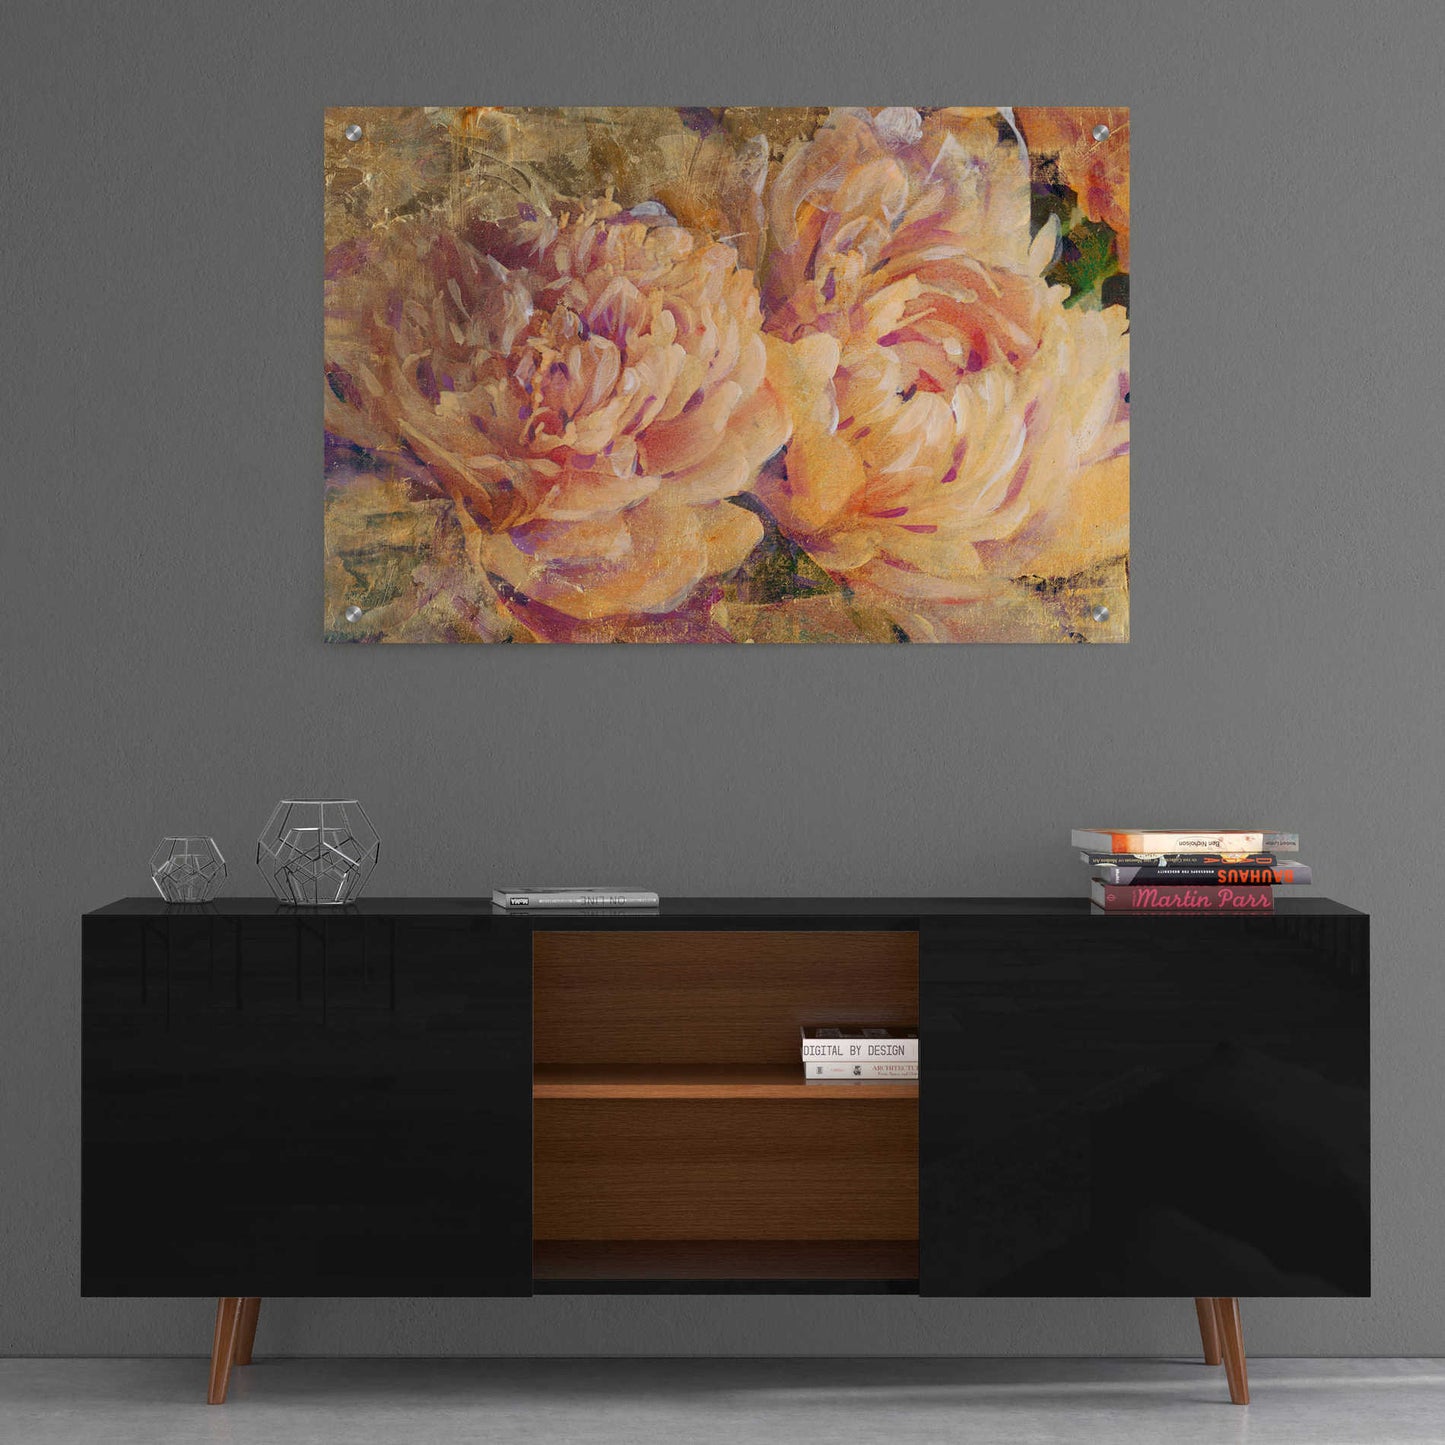 Epic Art 'Floral in Bloom III' by Tim O'Toole, Acrylic Glass Wall Art,36x24